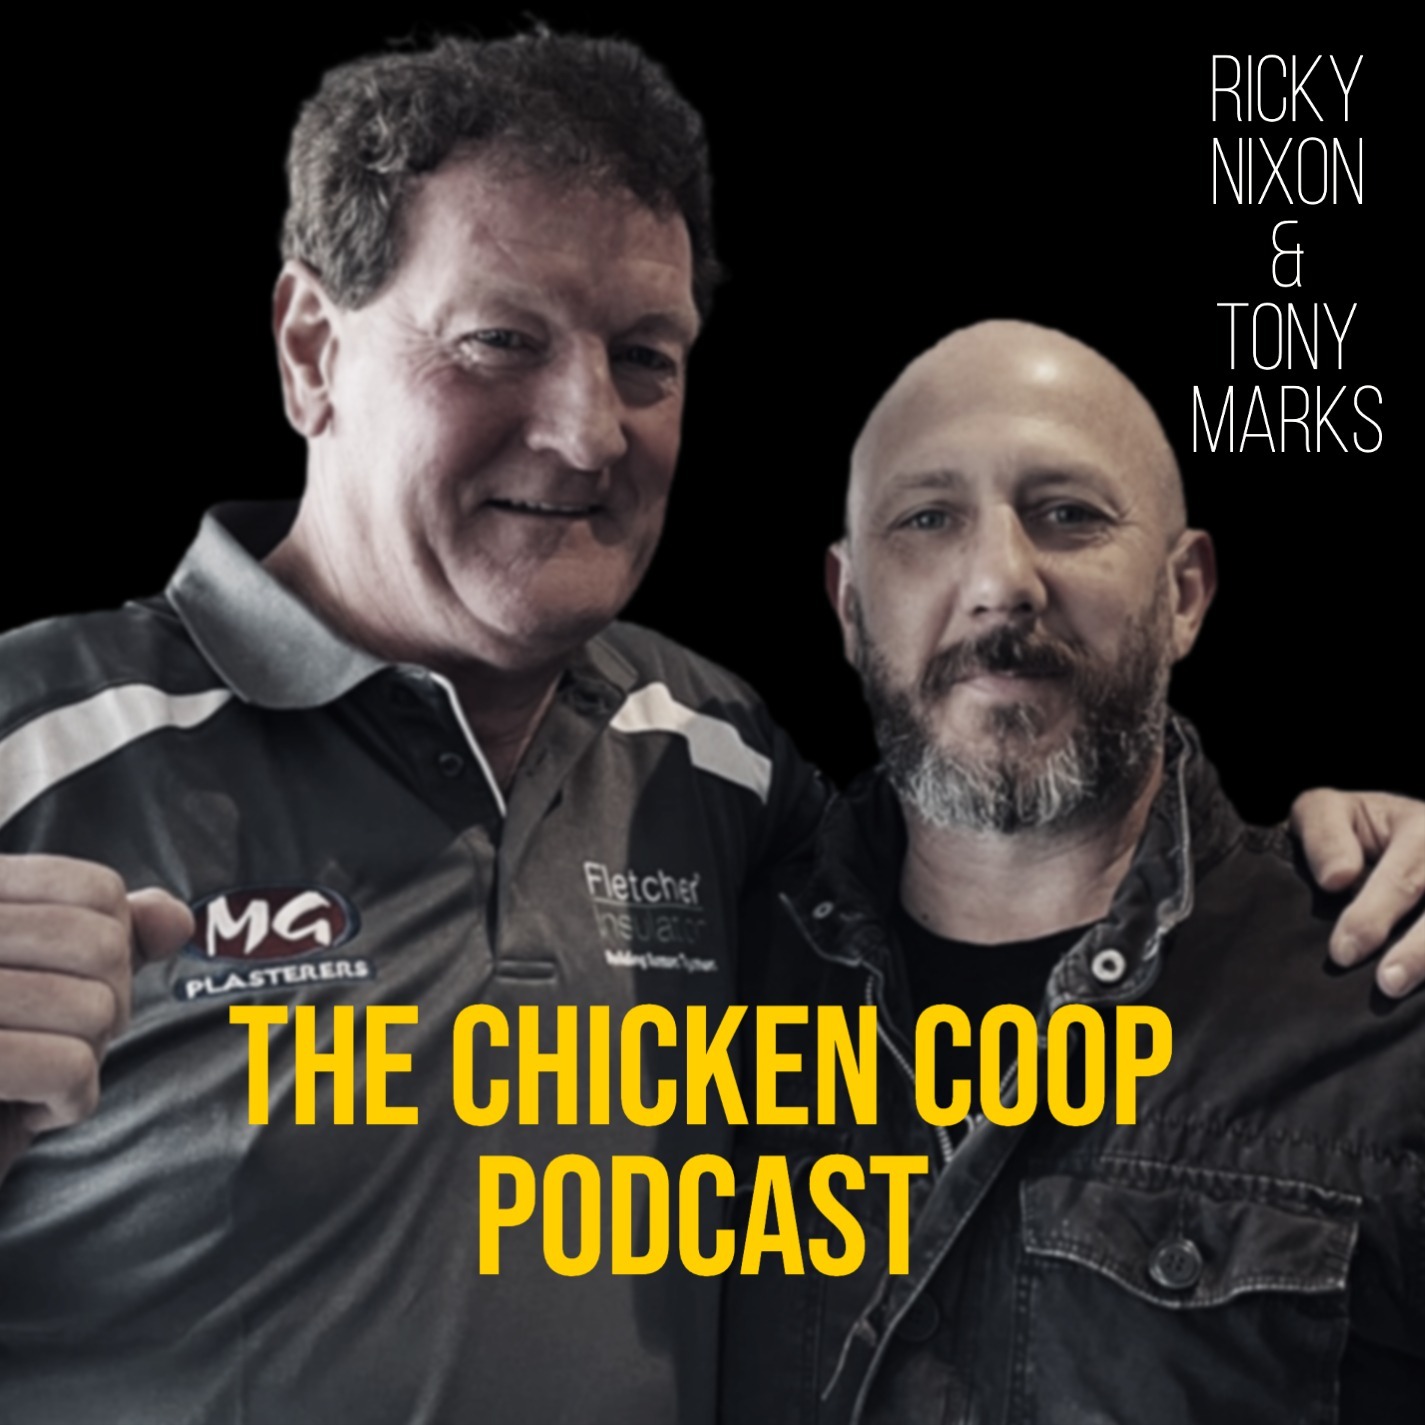 The Chicken Coop with Ricky Nixon & Tony Marks - Episode 2